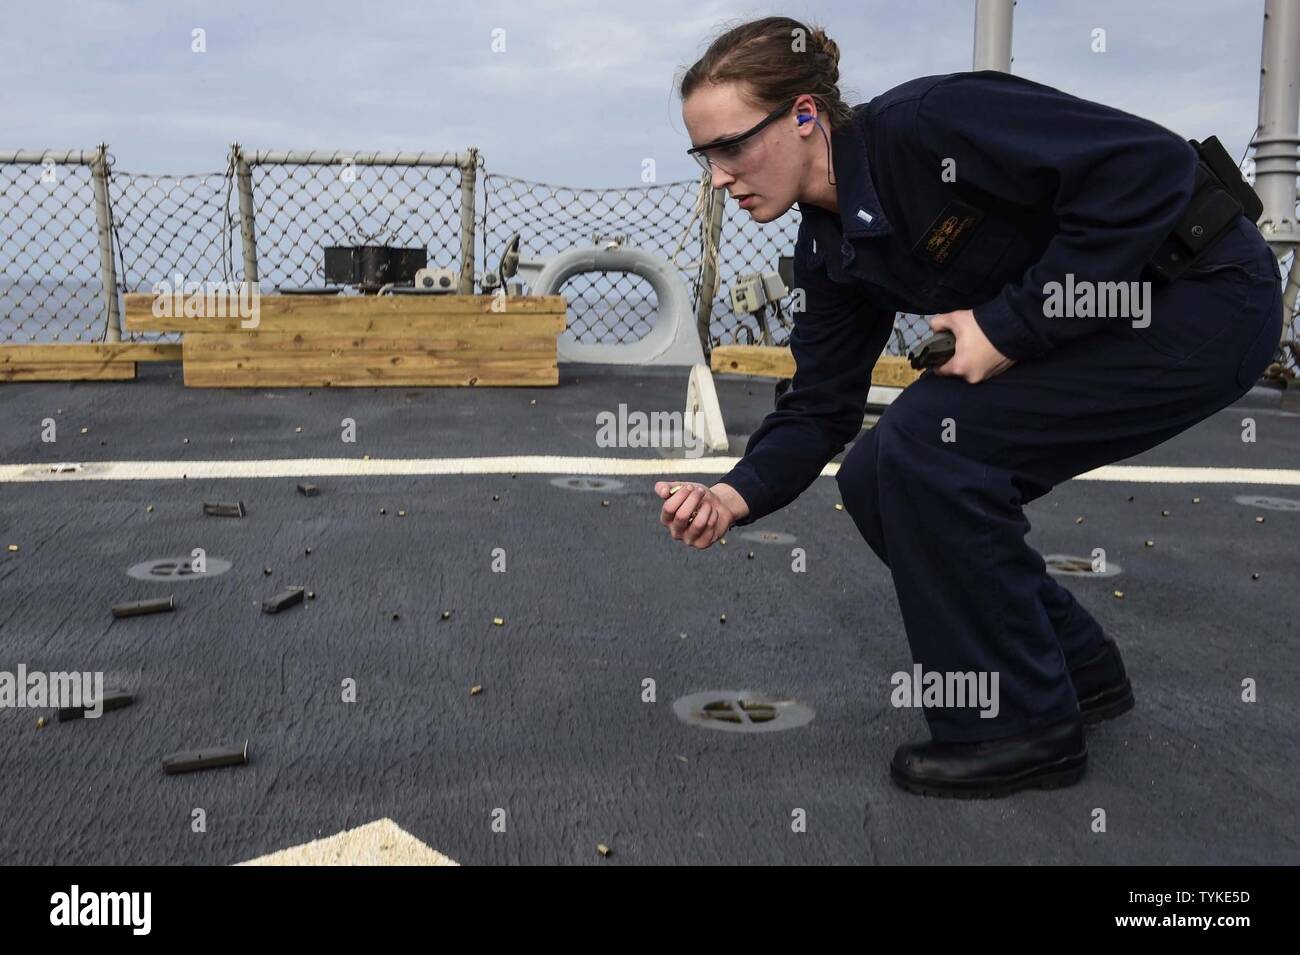 SEA (Nov. 14, 2016) Lt. j.g Danielle Garbarino from Vail, Colo., polices her brass during a small arms shoot aboard USS Ross (DDG 71) Nov. 14, 2016.  Ross, an Arleigh Burke-class guided-missile destroyer, forward-deployed to Rota, Spain, is conducting naval operations in the U.S. 6th Fleet area of operations in support of U.S. national security interests in Europe and Africa. Stock Photo